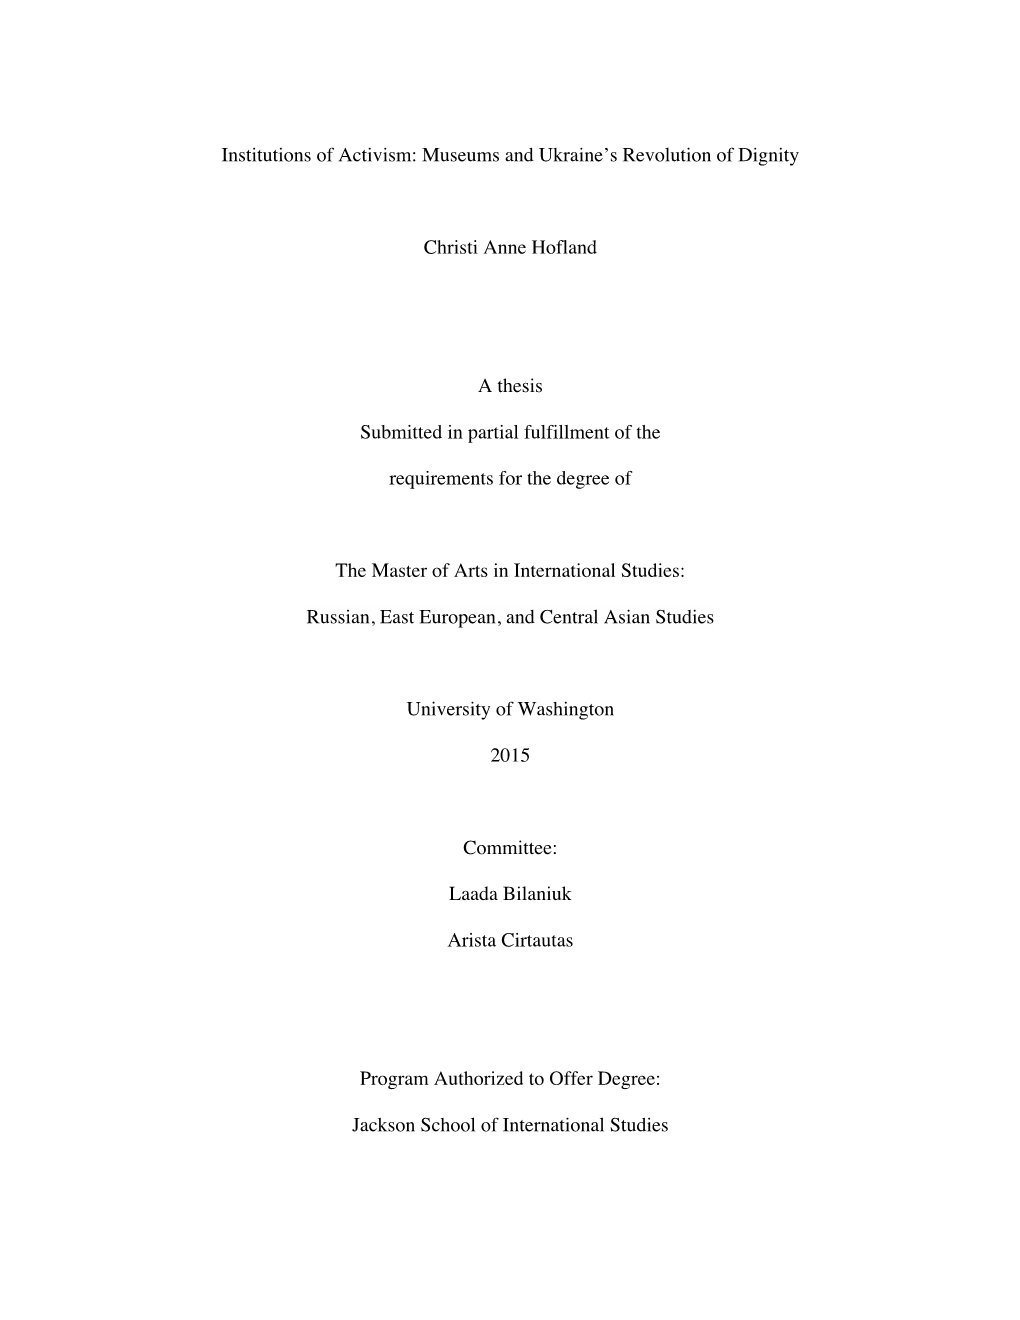 Museums and Ukraine's Revolution of Dignity Christi Anne Hofland a Thesis Submitted in Partial Fulfi